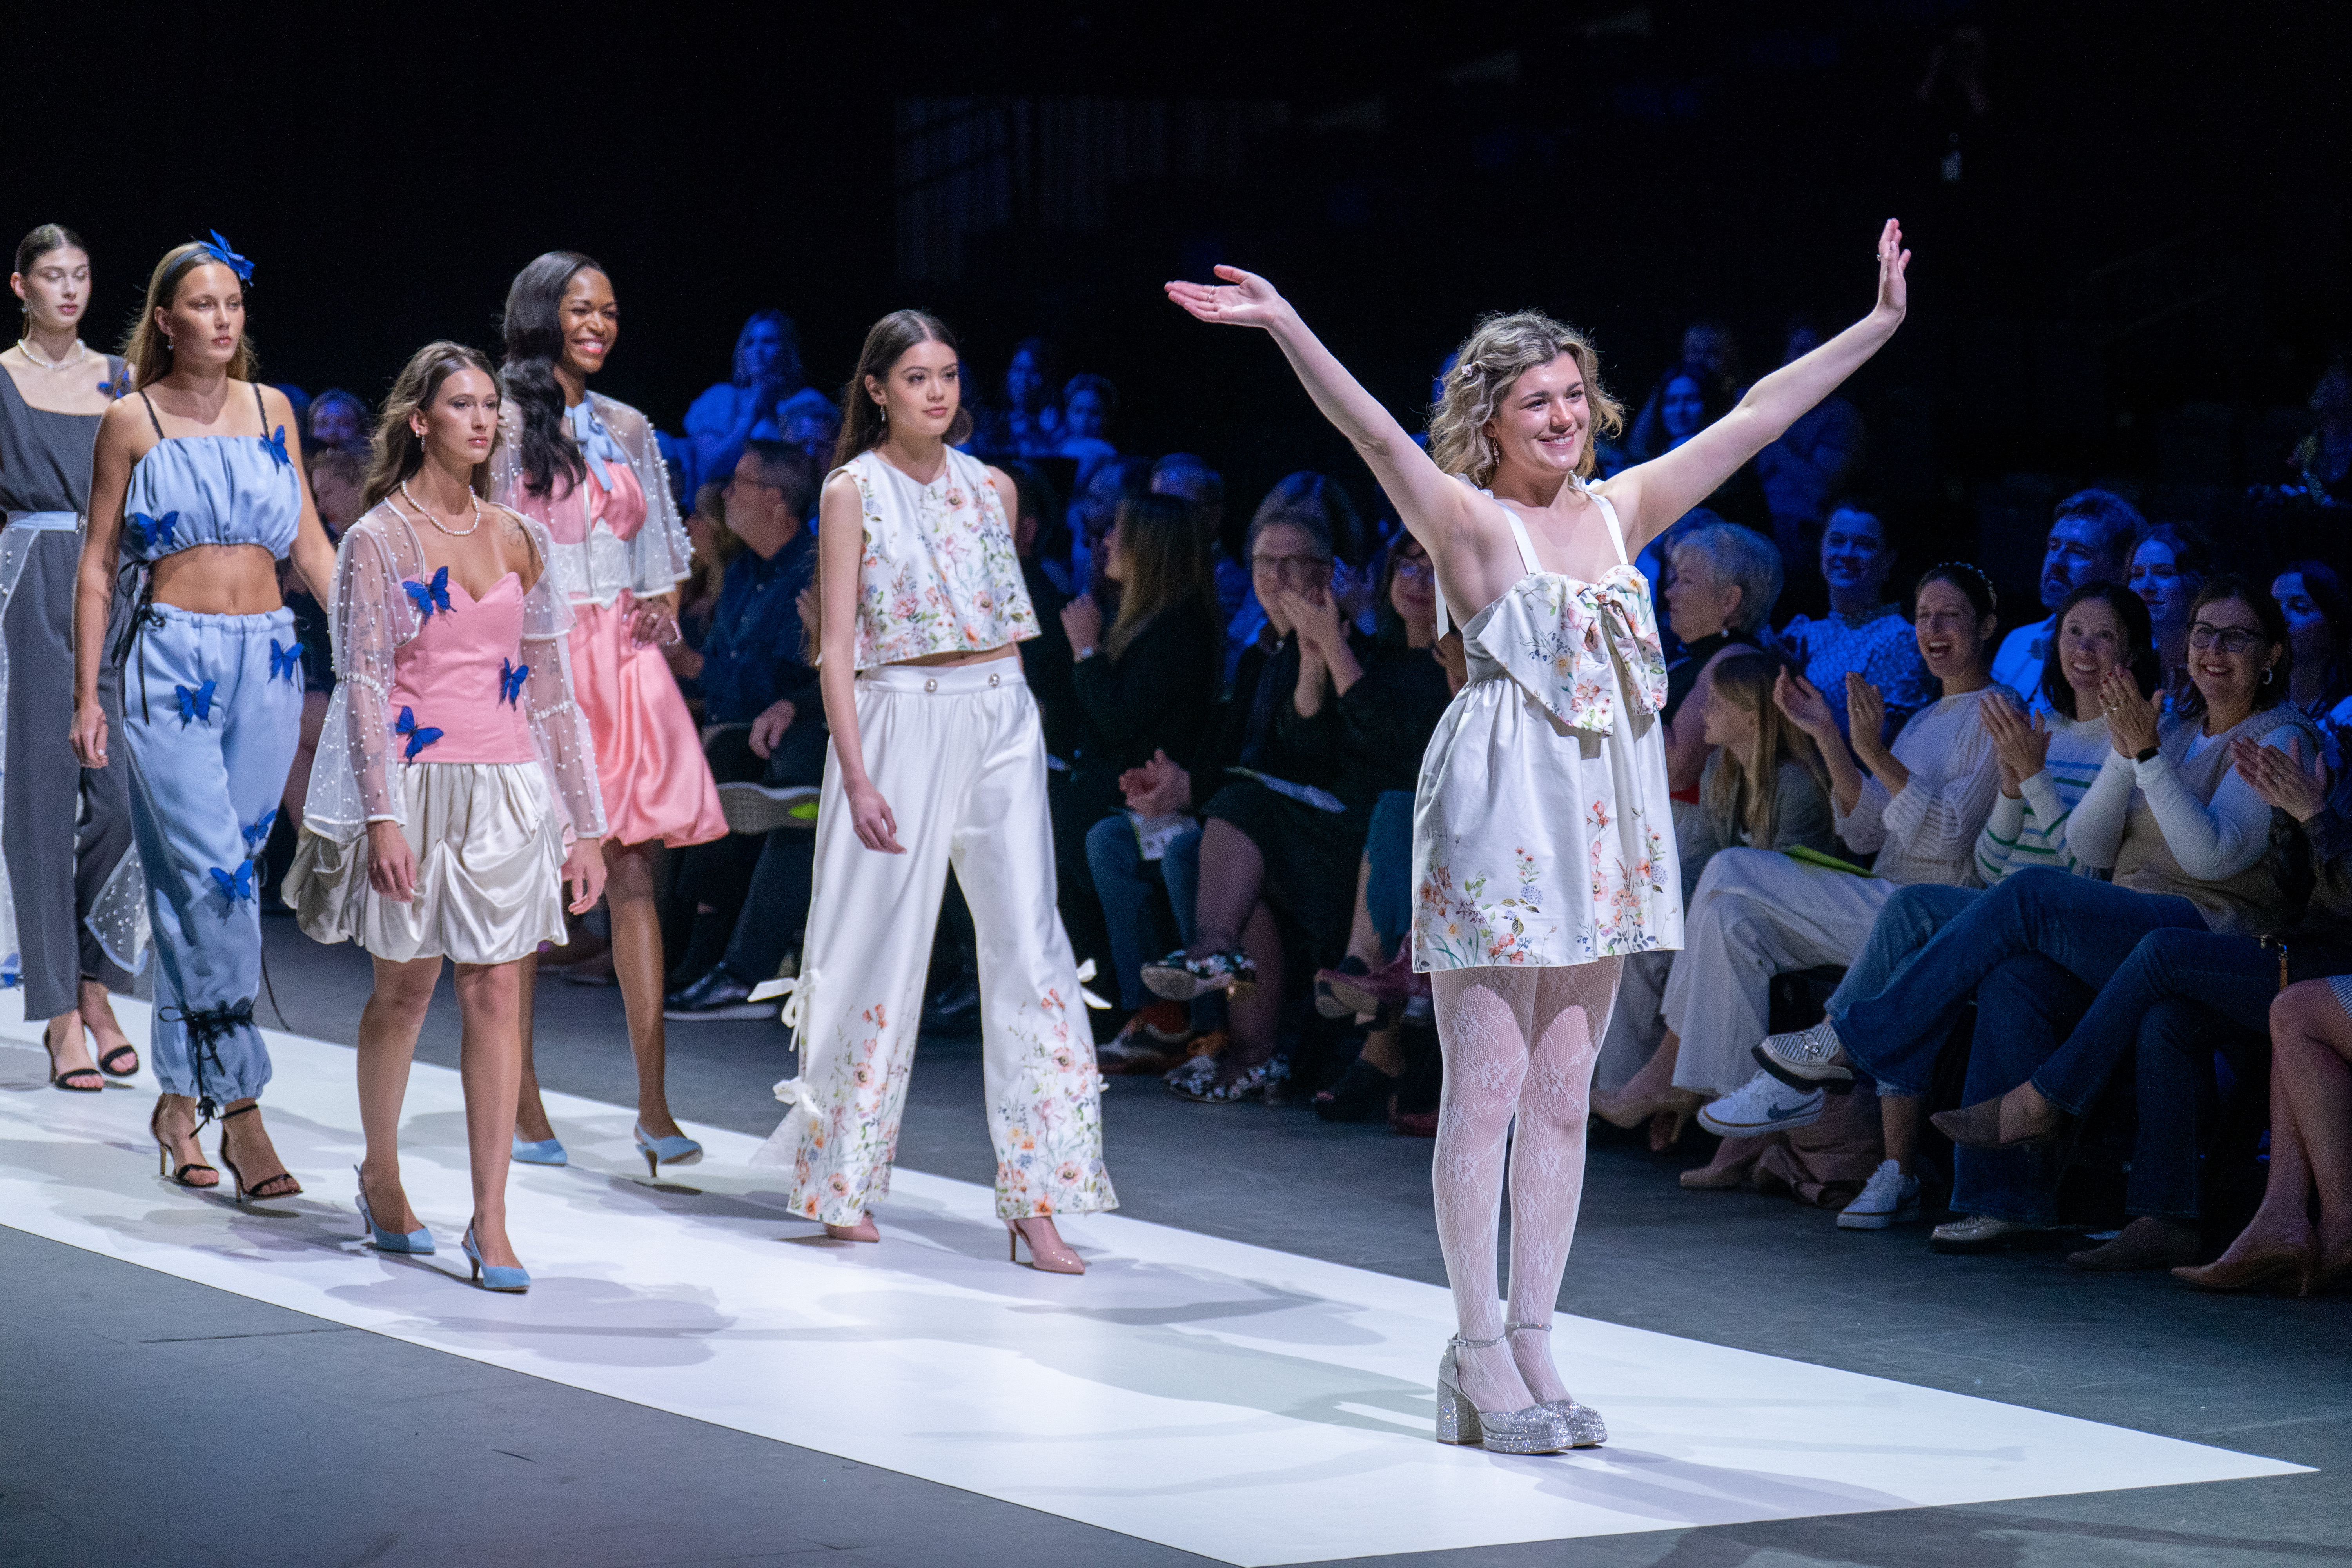 Models and designer showing a floral/pink/white/blue collection